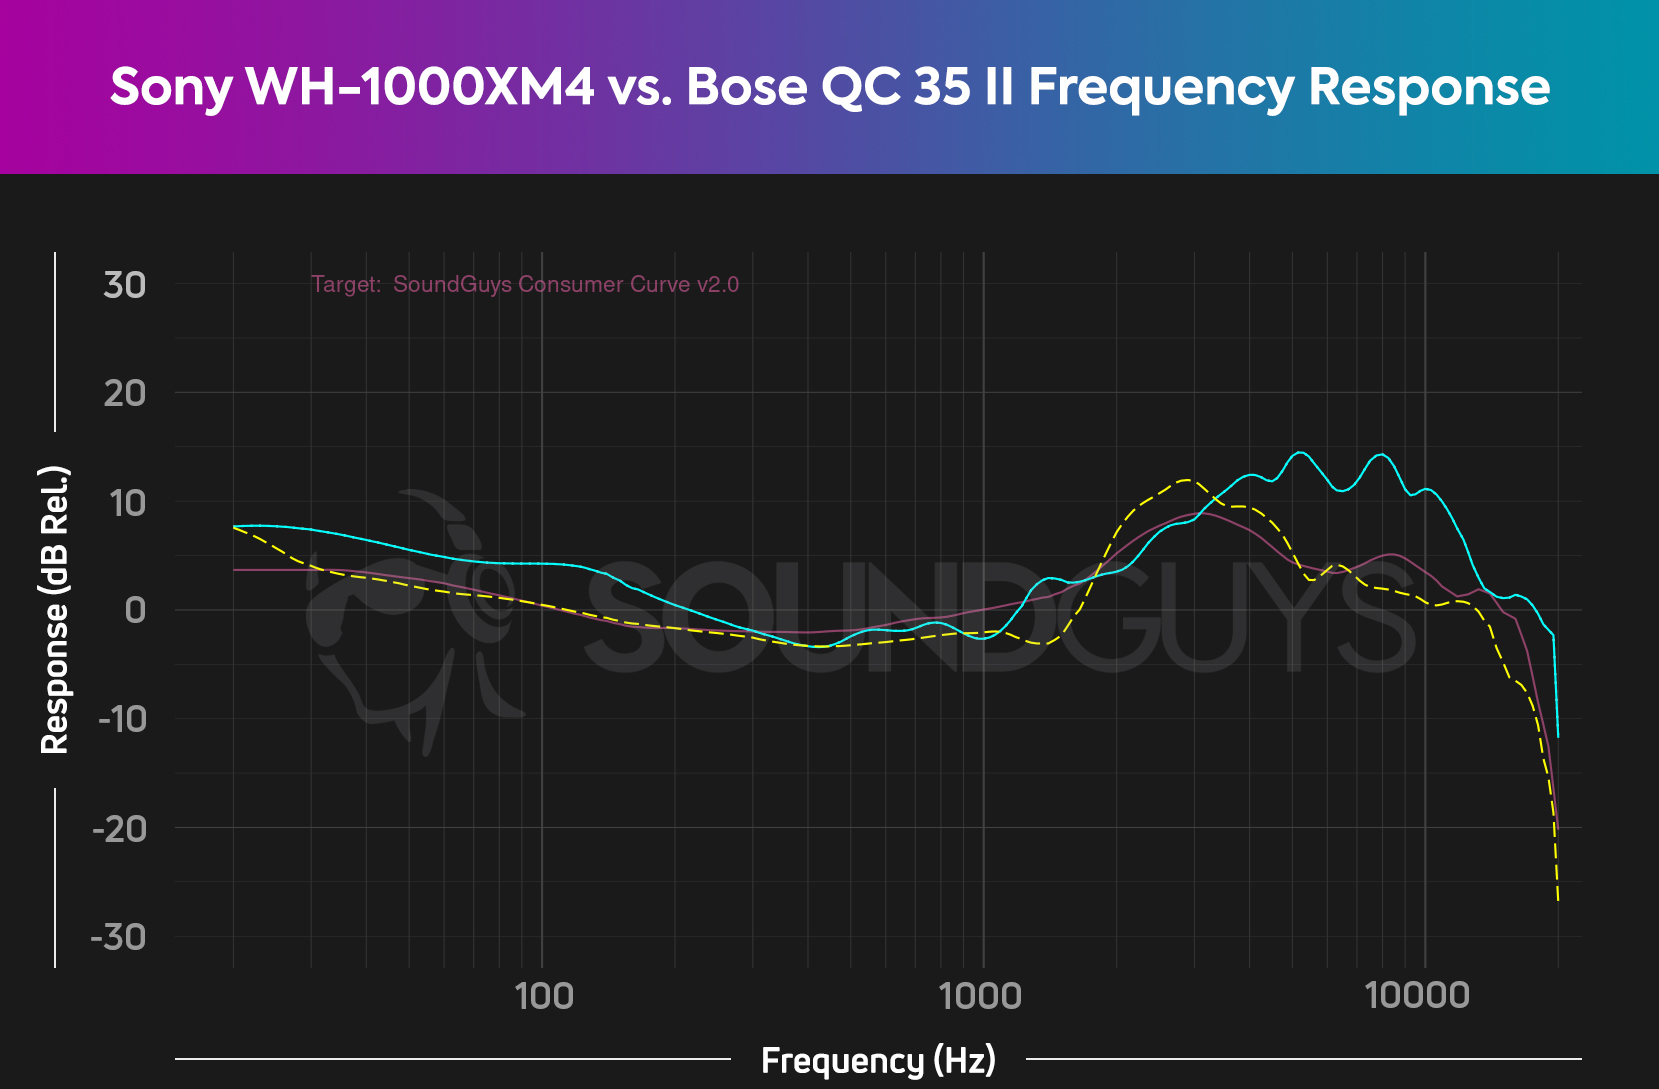 A chart comparing the frequency responses of the Sony WH-1000XM4 vs. the Bose QC 35 II.